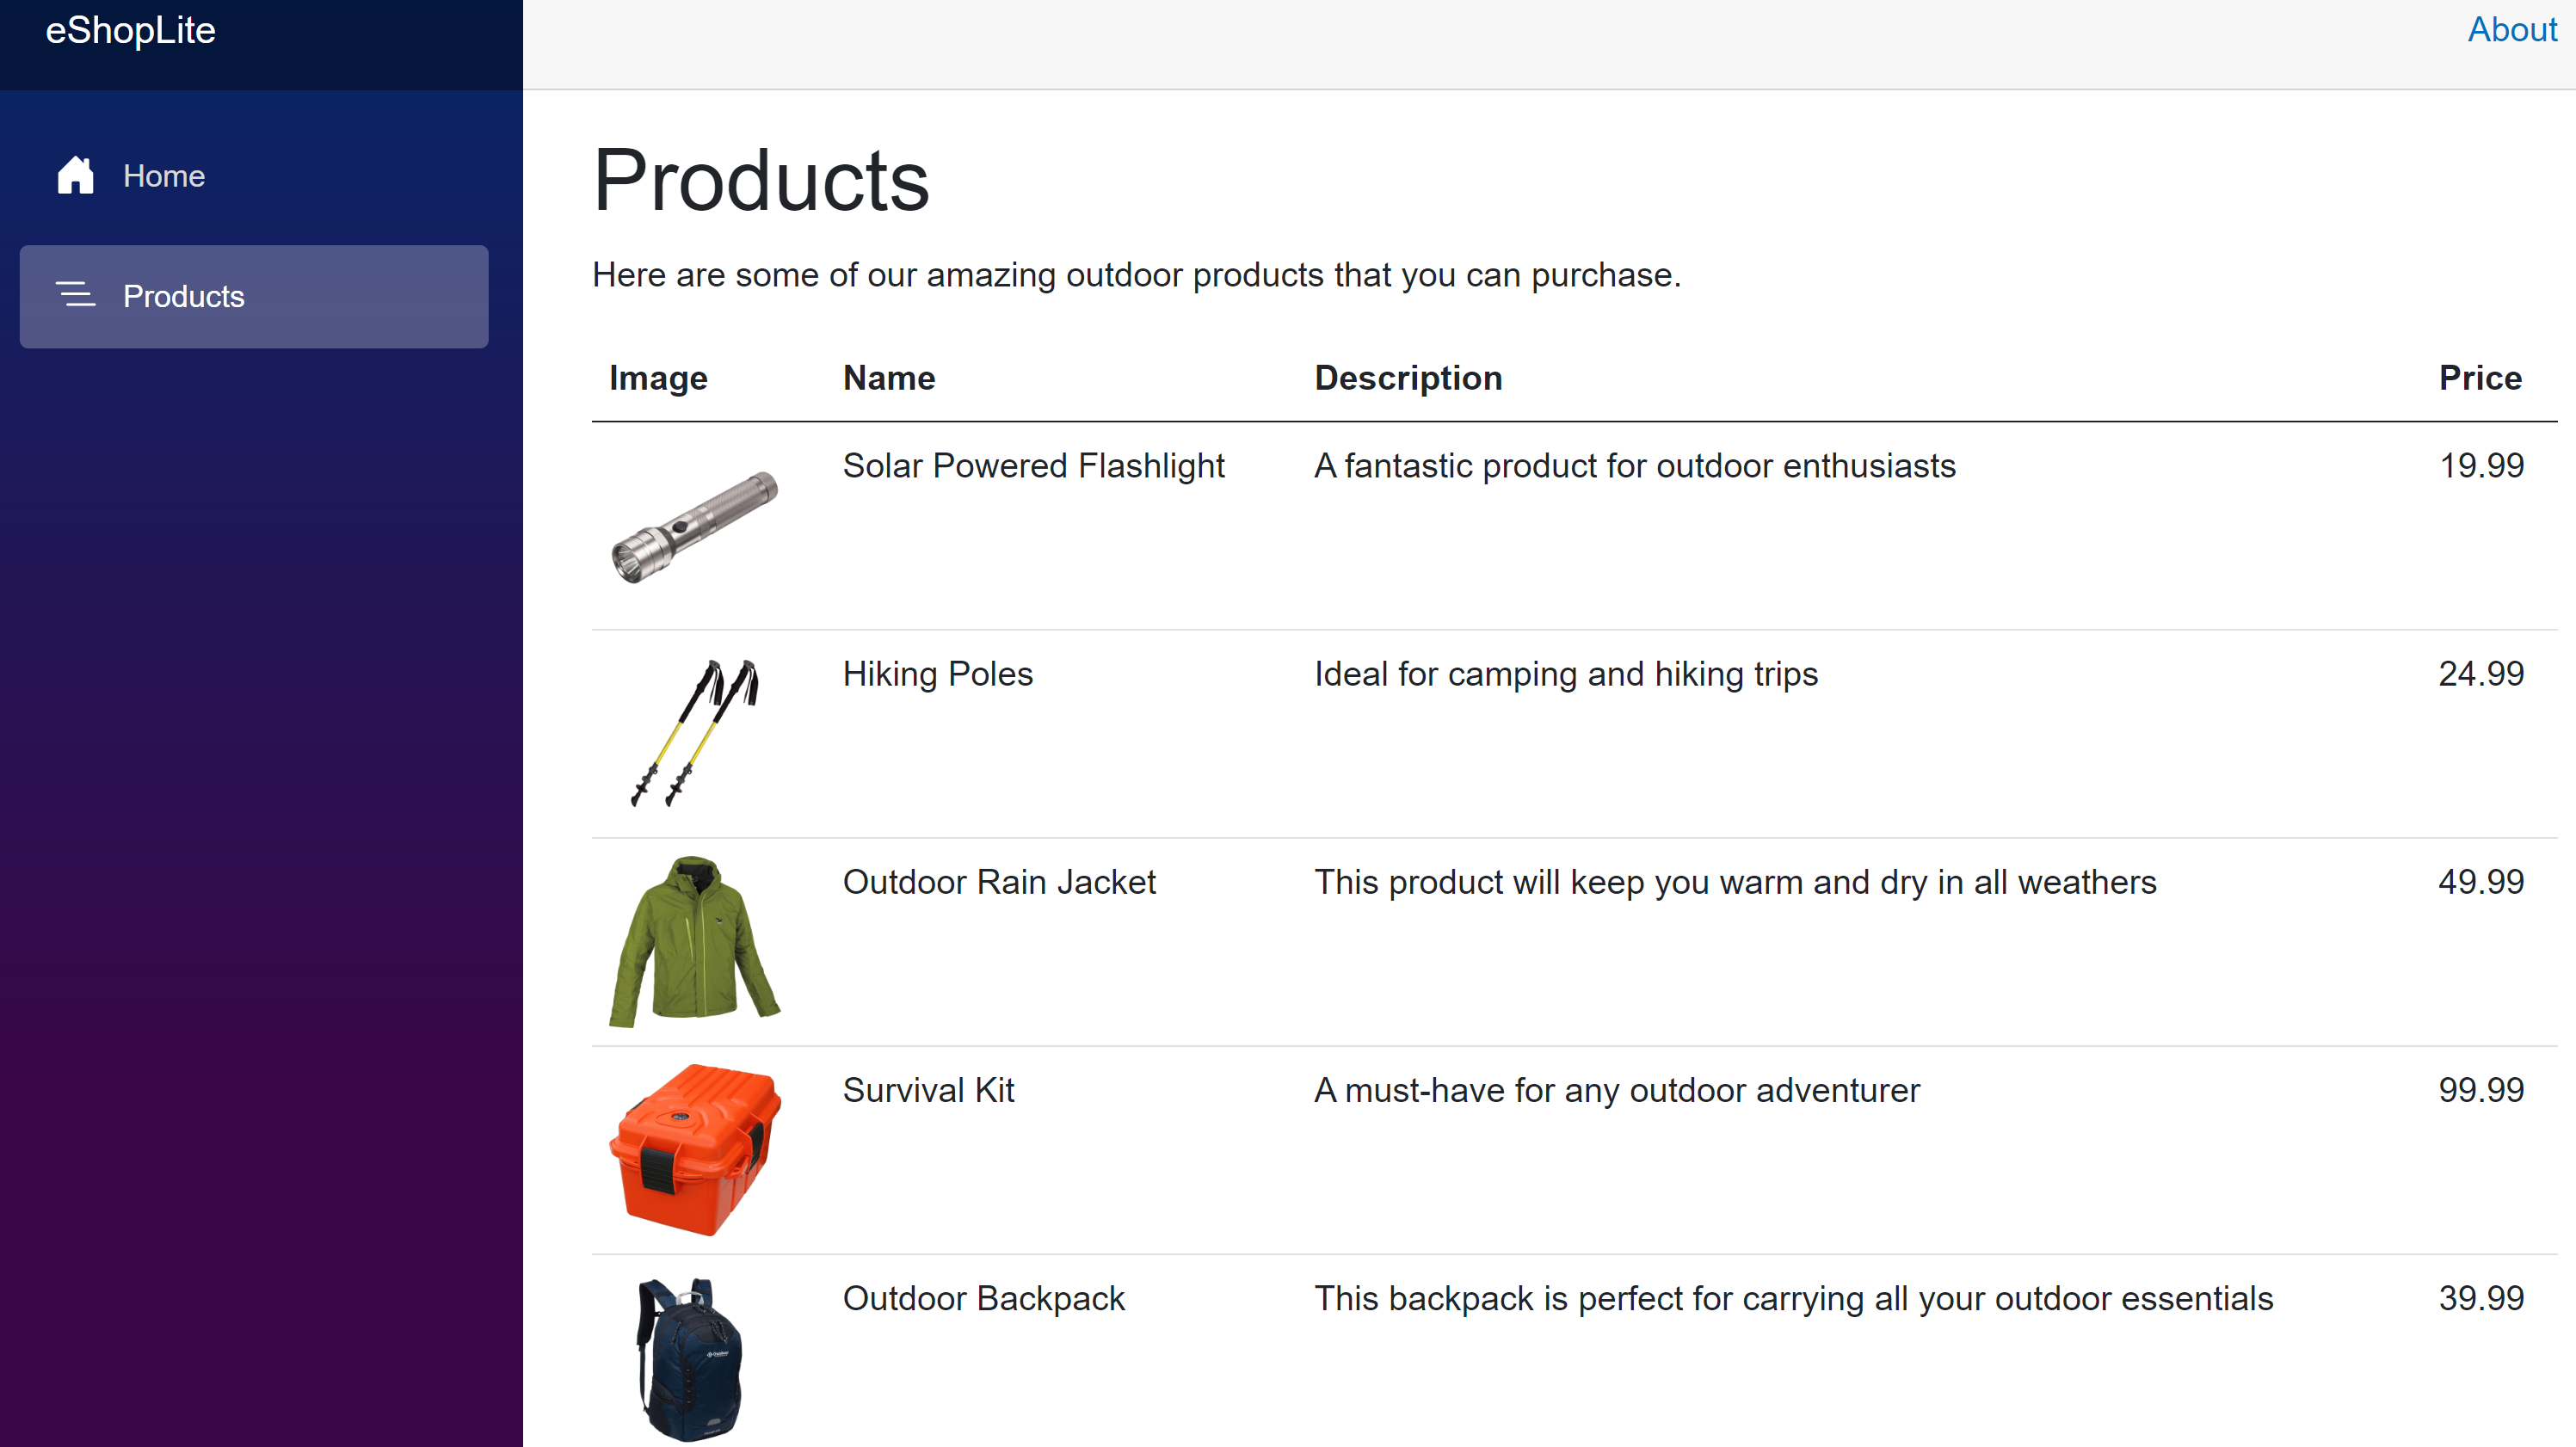 A screenshot of the eSHopLite products page.